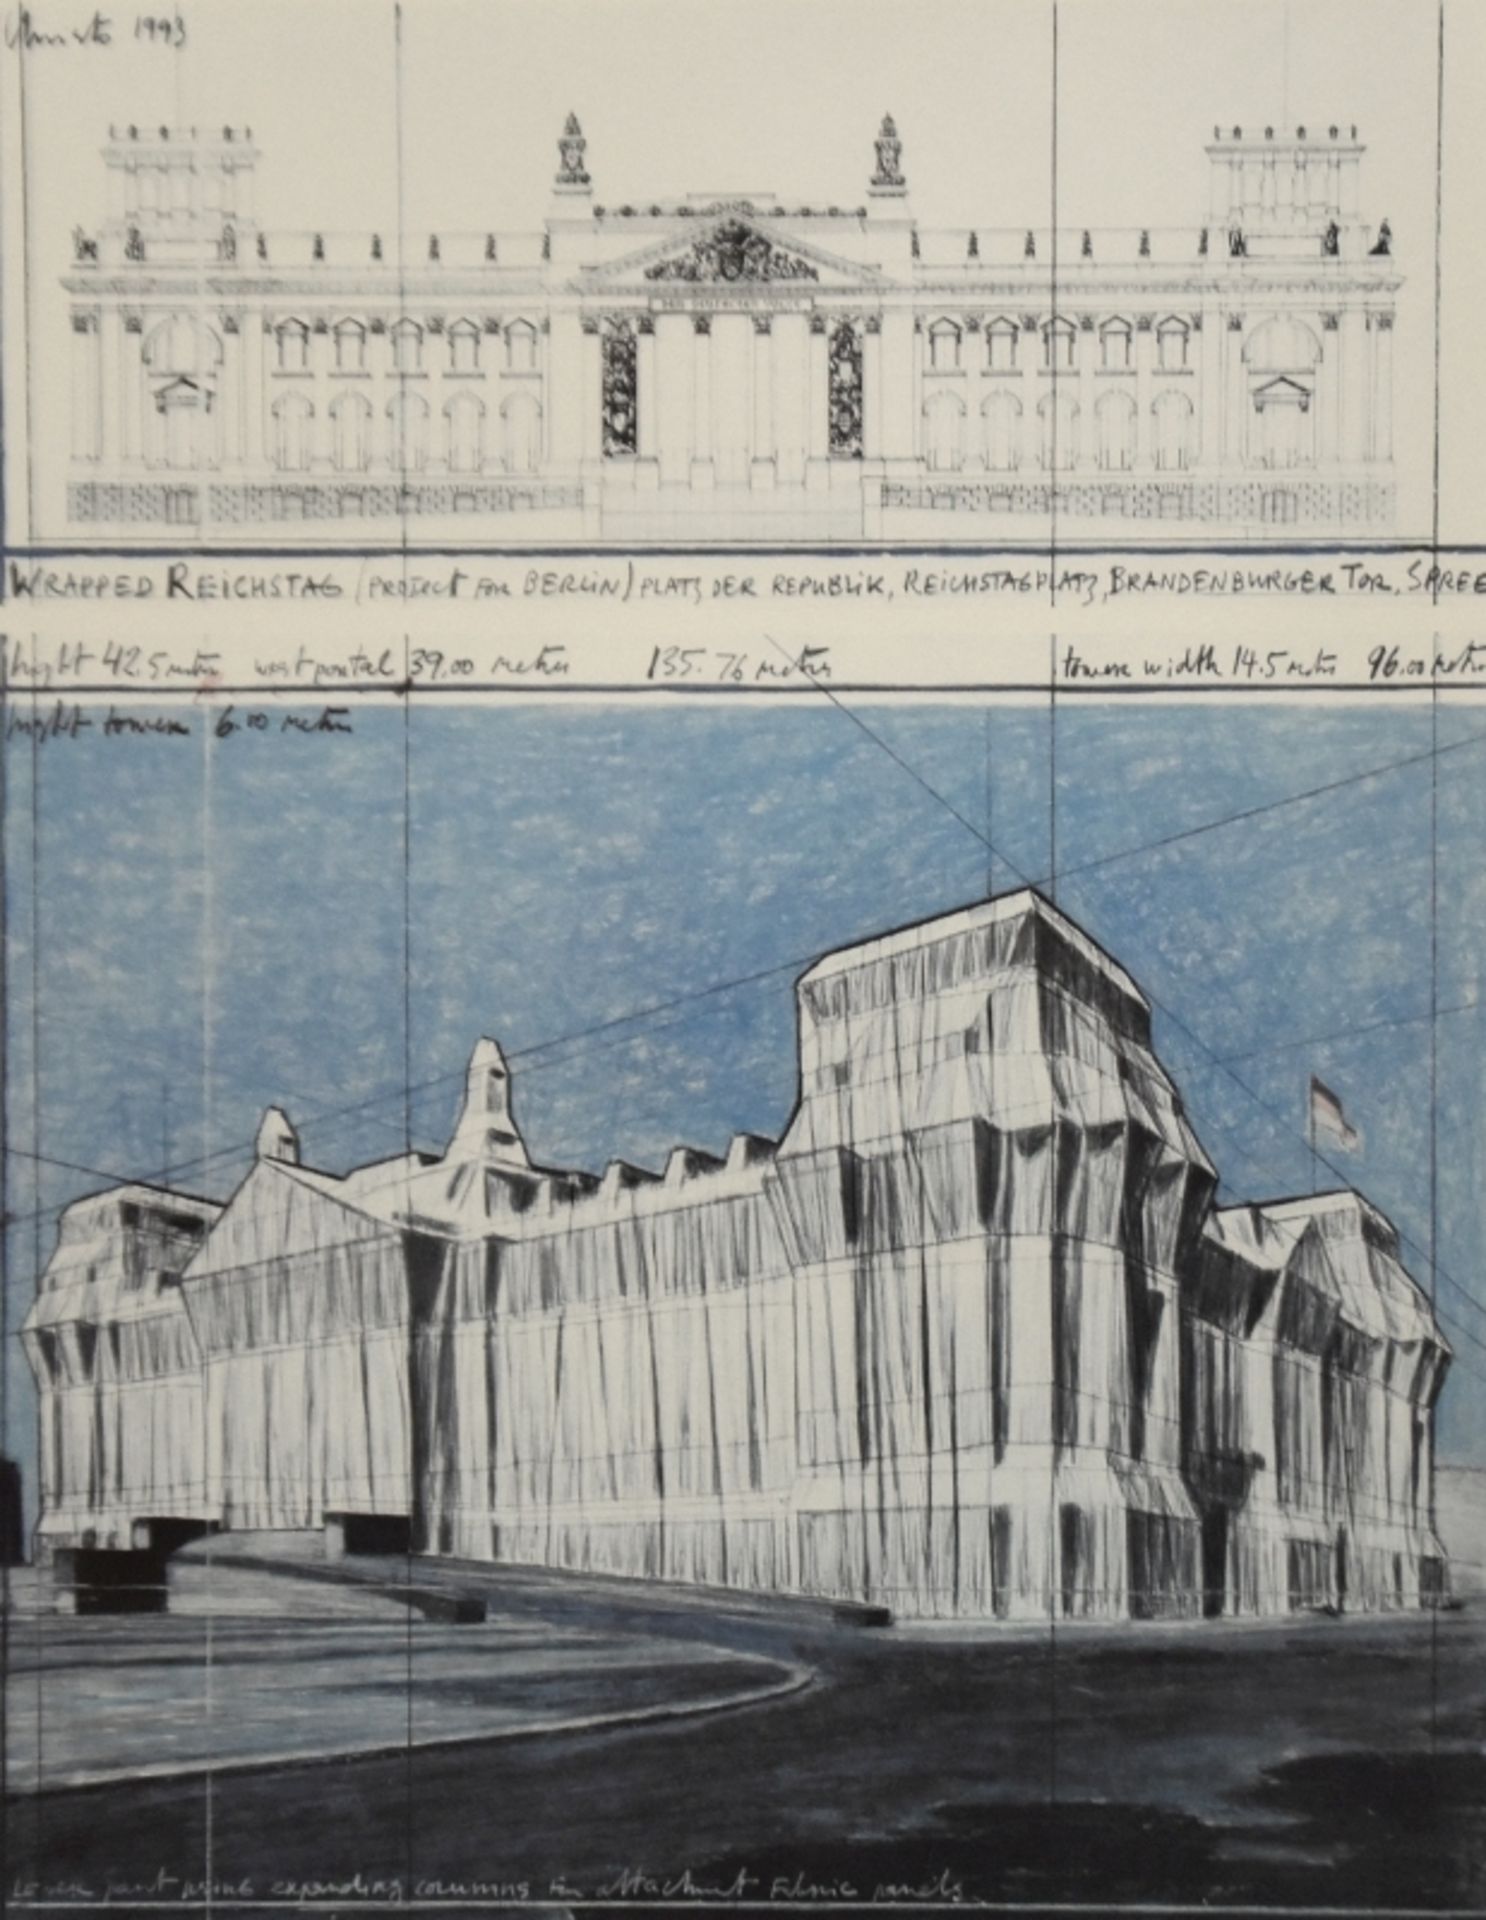 CHRISTO "Wrapped Reichstag - Project for Berlin"